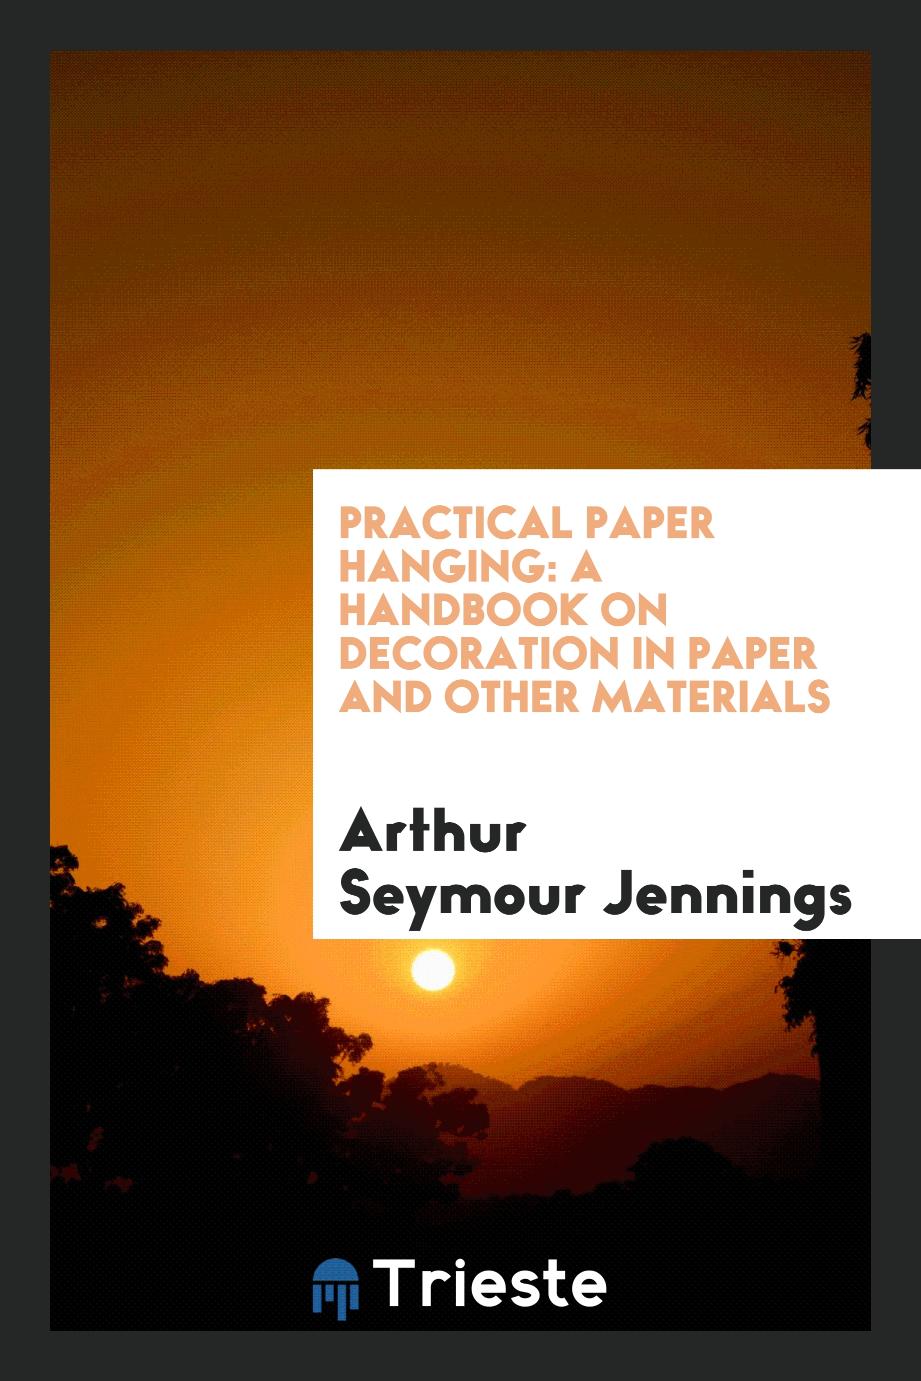 Practical Paper Hanging: A Handbook on Decoration in Paper and Other Materials